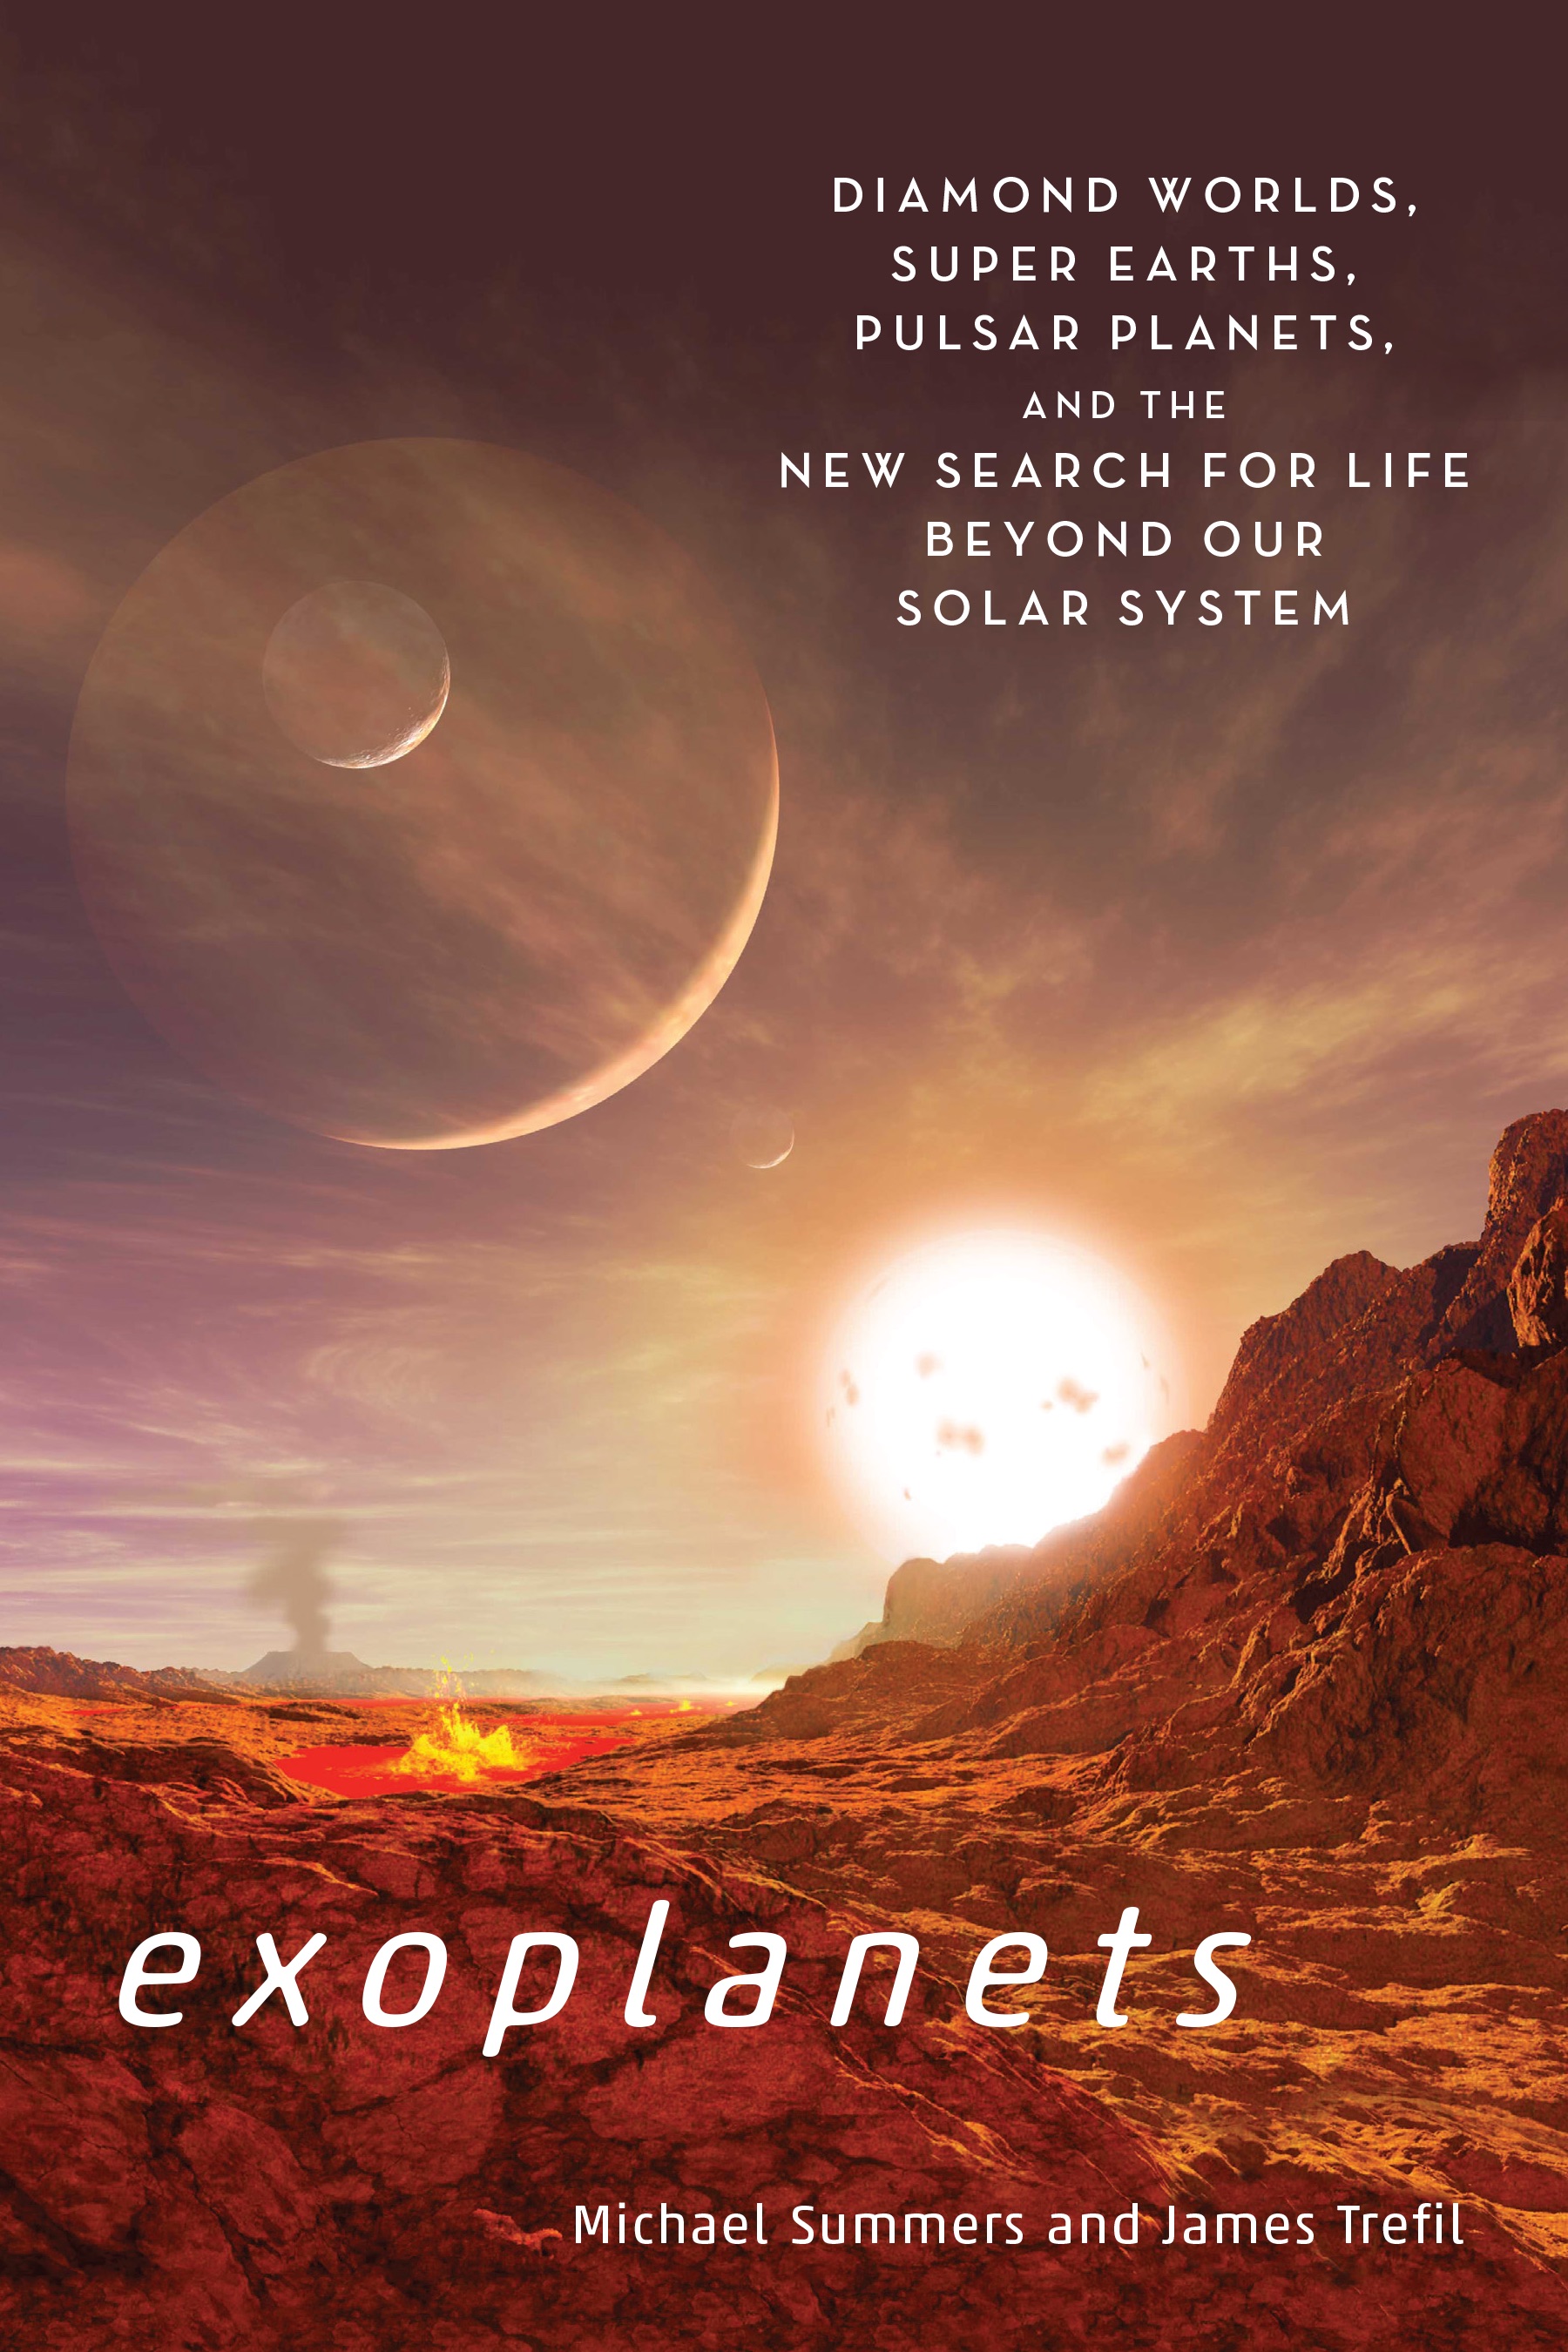 Weird Worlds: 'Exoplanets' Authors Talk Planetary Surprises | Space